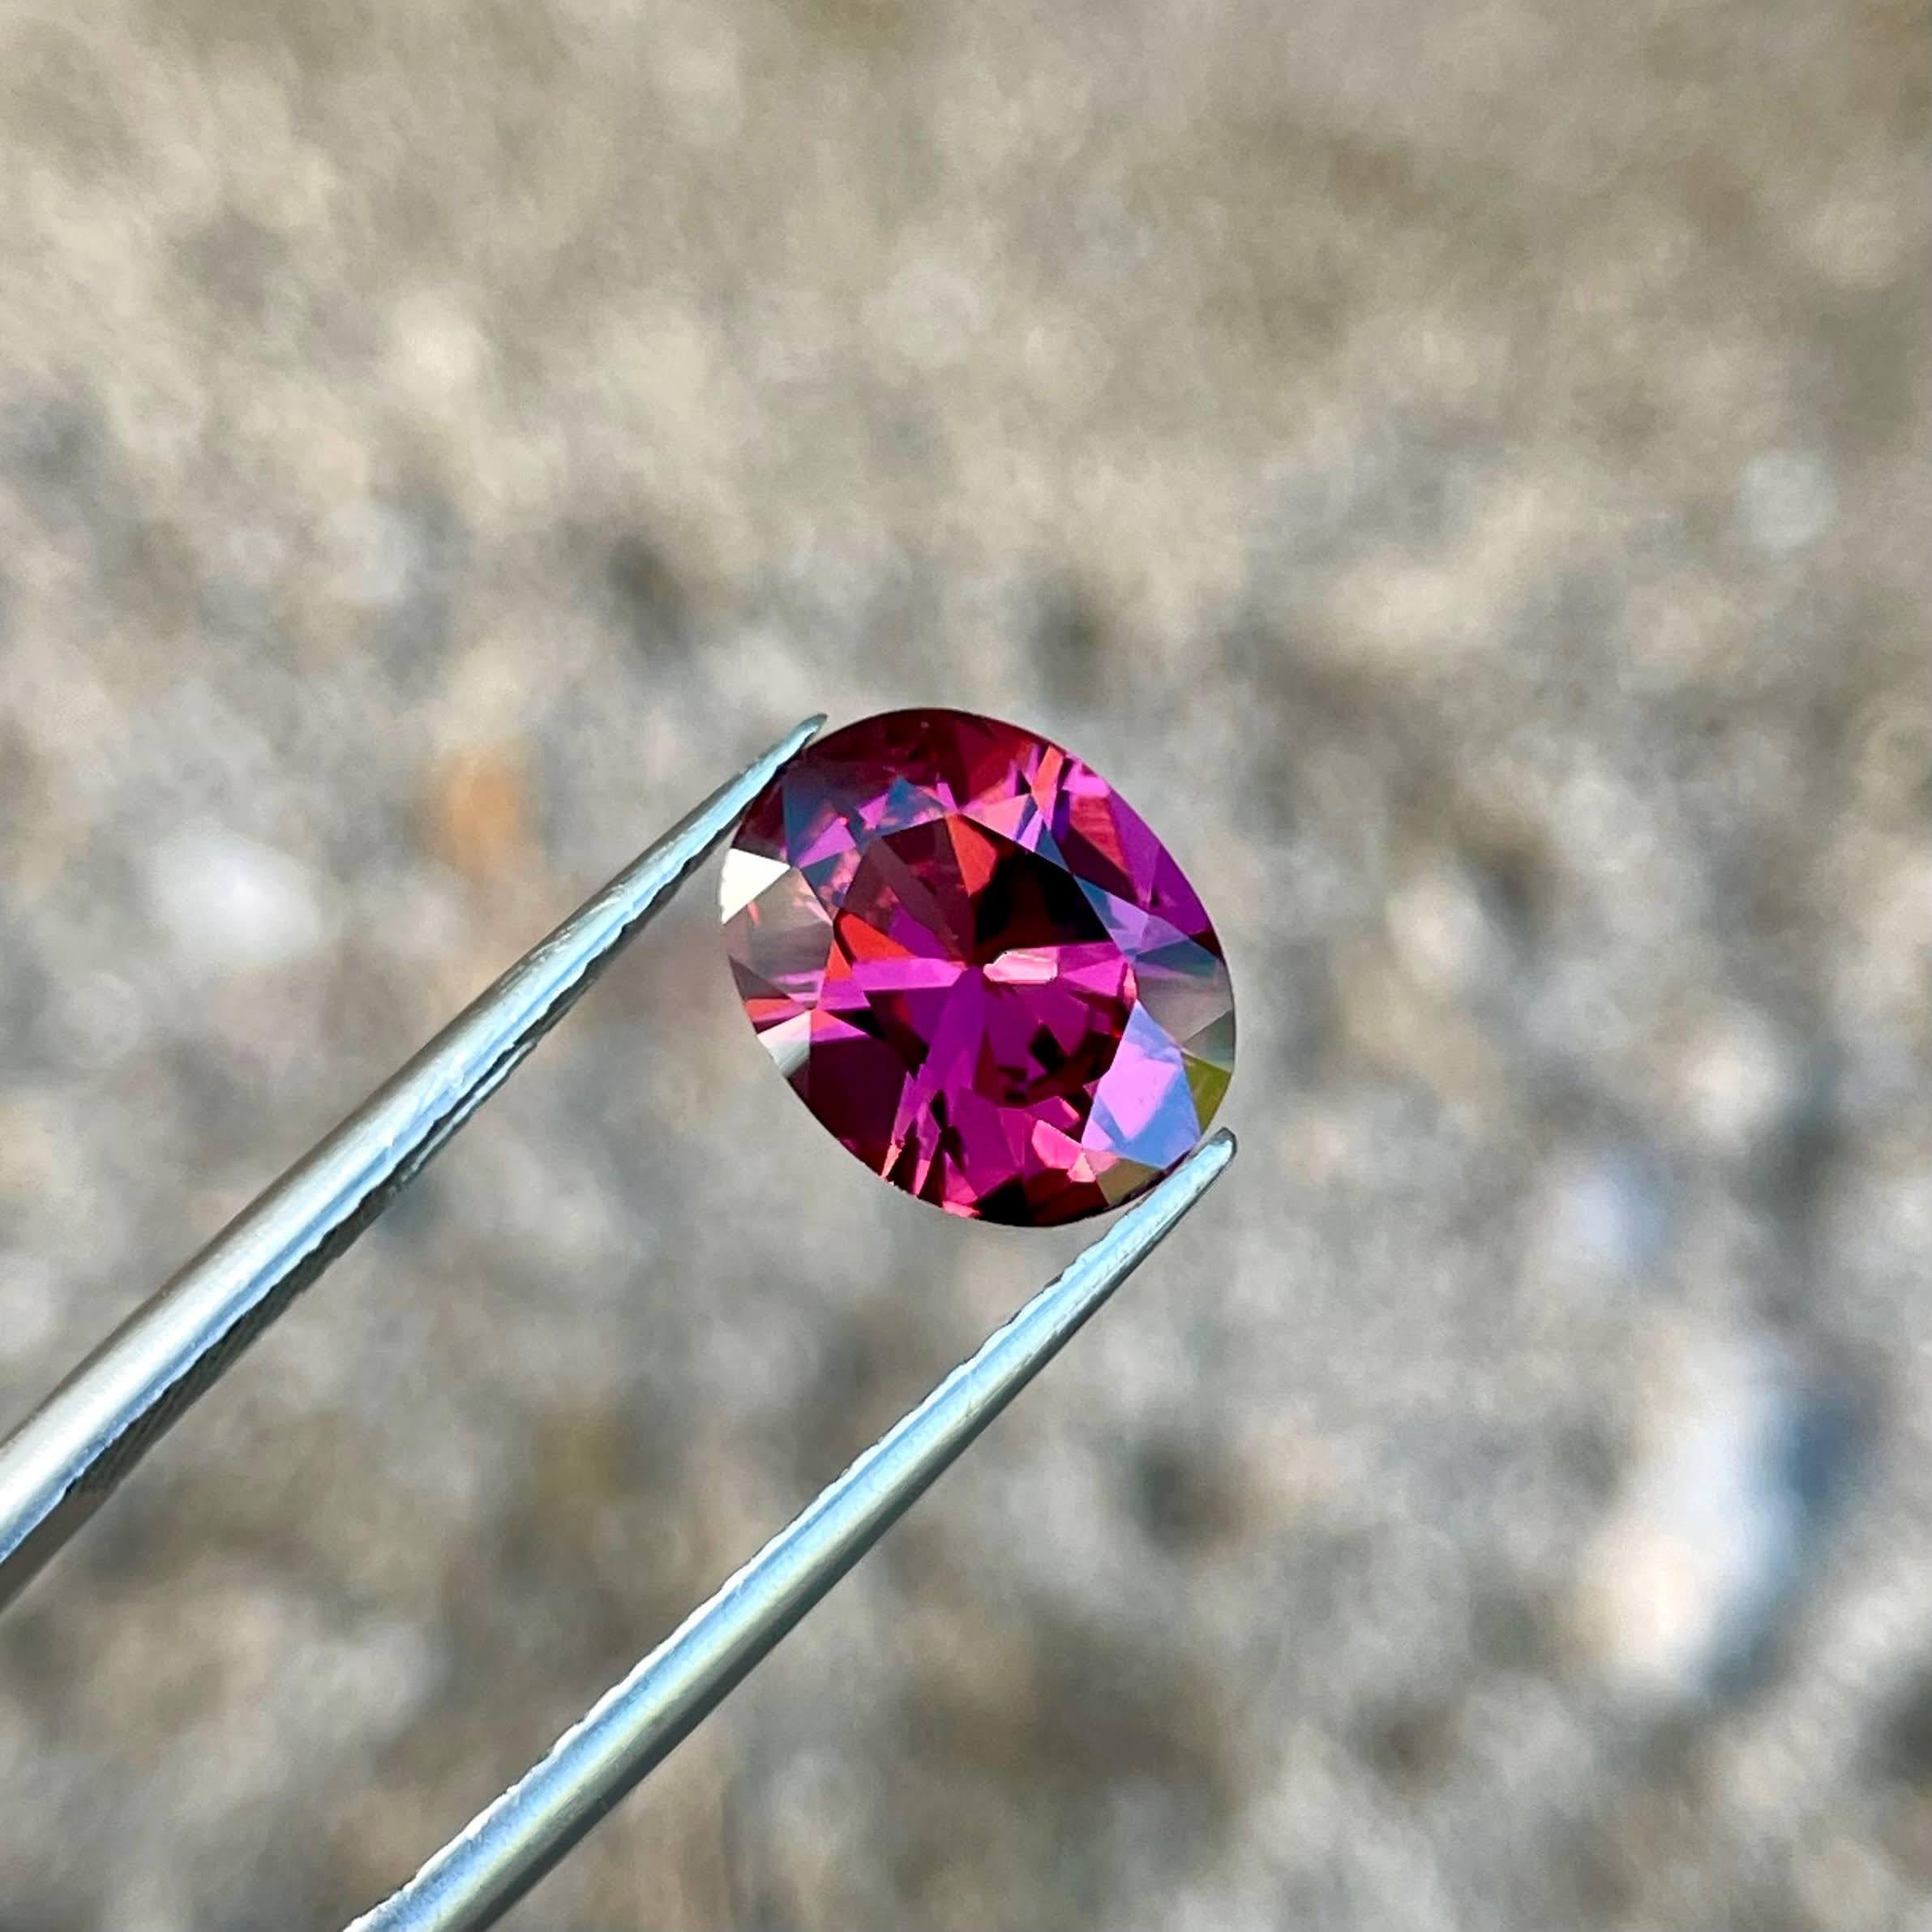 Weight 2.35 carats 
Dimensions 9.8x7.7x4.52 mm
Treatment none 
Origin Tanzania 
Clarity loupe clean 
Shape oval 
Cut custom precision 




The Pinkish Red Garnet Stone is a radiant gem of exquisite beauty, boasting a weighty 2.35 carats. Cut into a